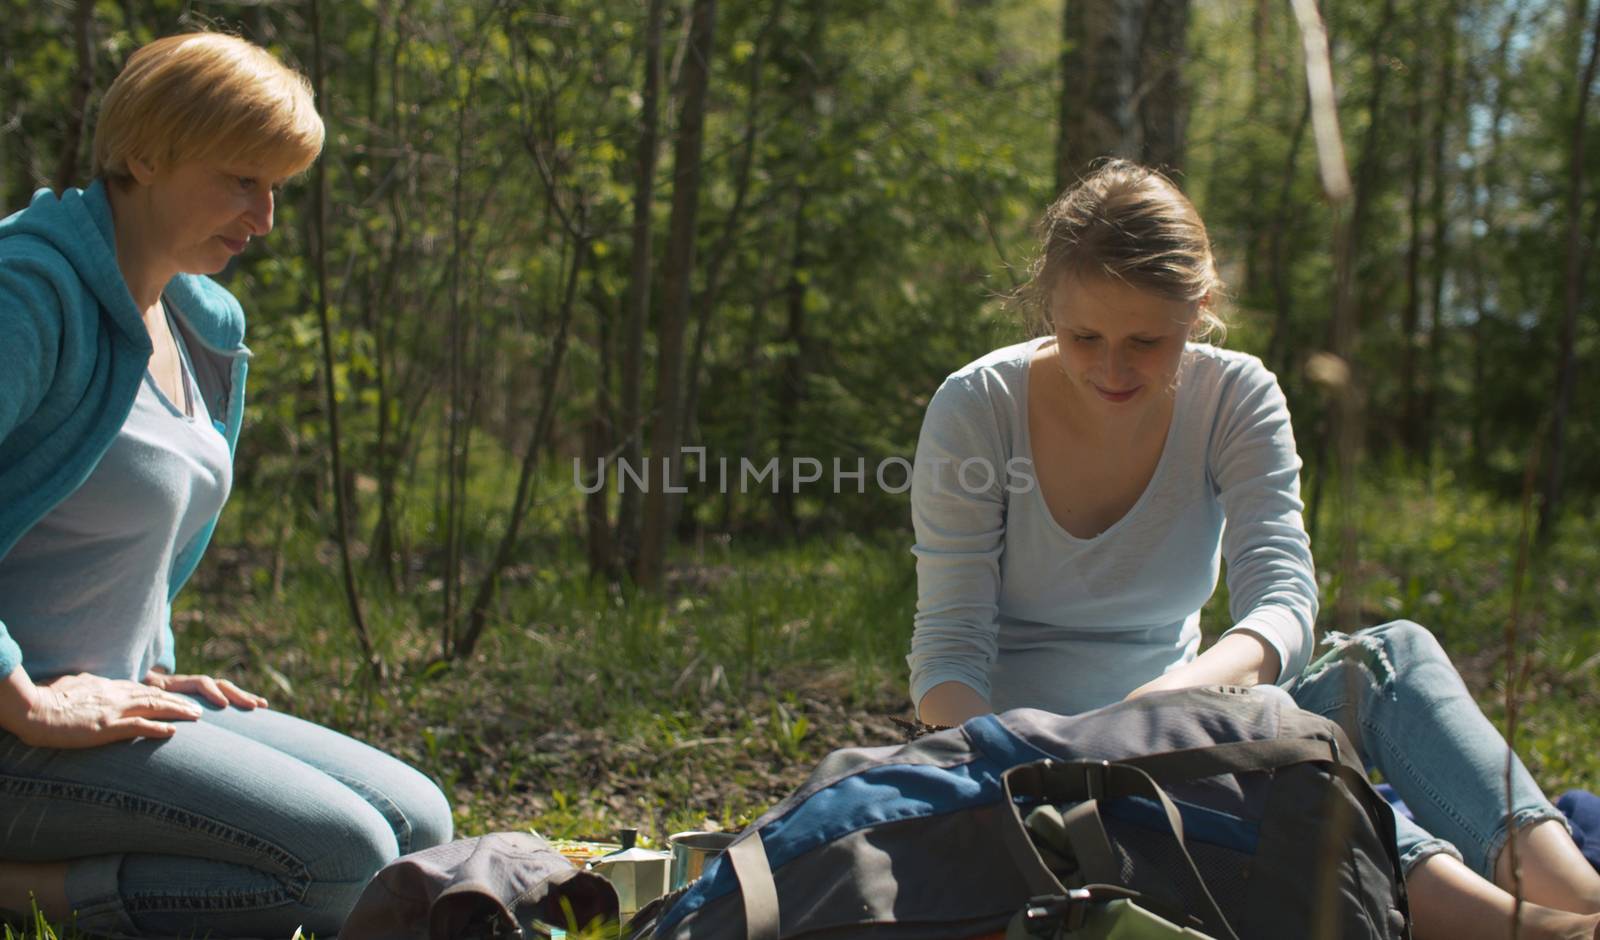 Snack during trekking. Two women sitting on the grass in the forest. They take out a italian espresso maker and a lunch box from a backpack.